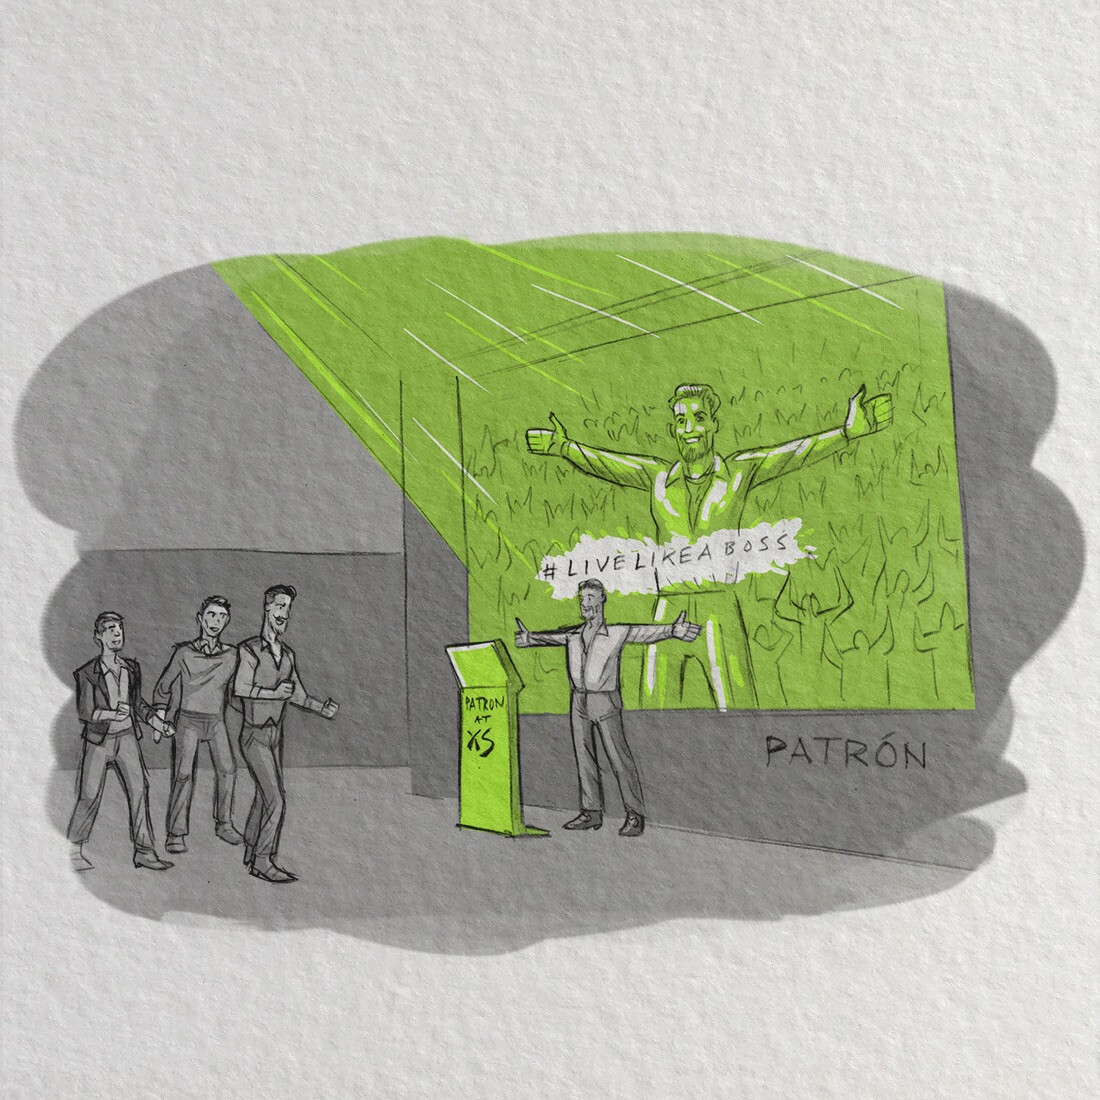 Sketch of bottle brand experience concept: a selfie space outside a nightclub that lets the person be projected in front of a huge crowd.